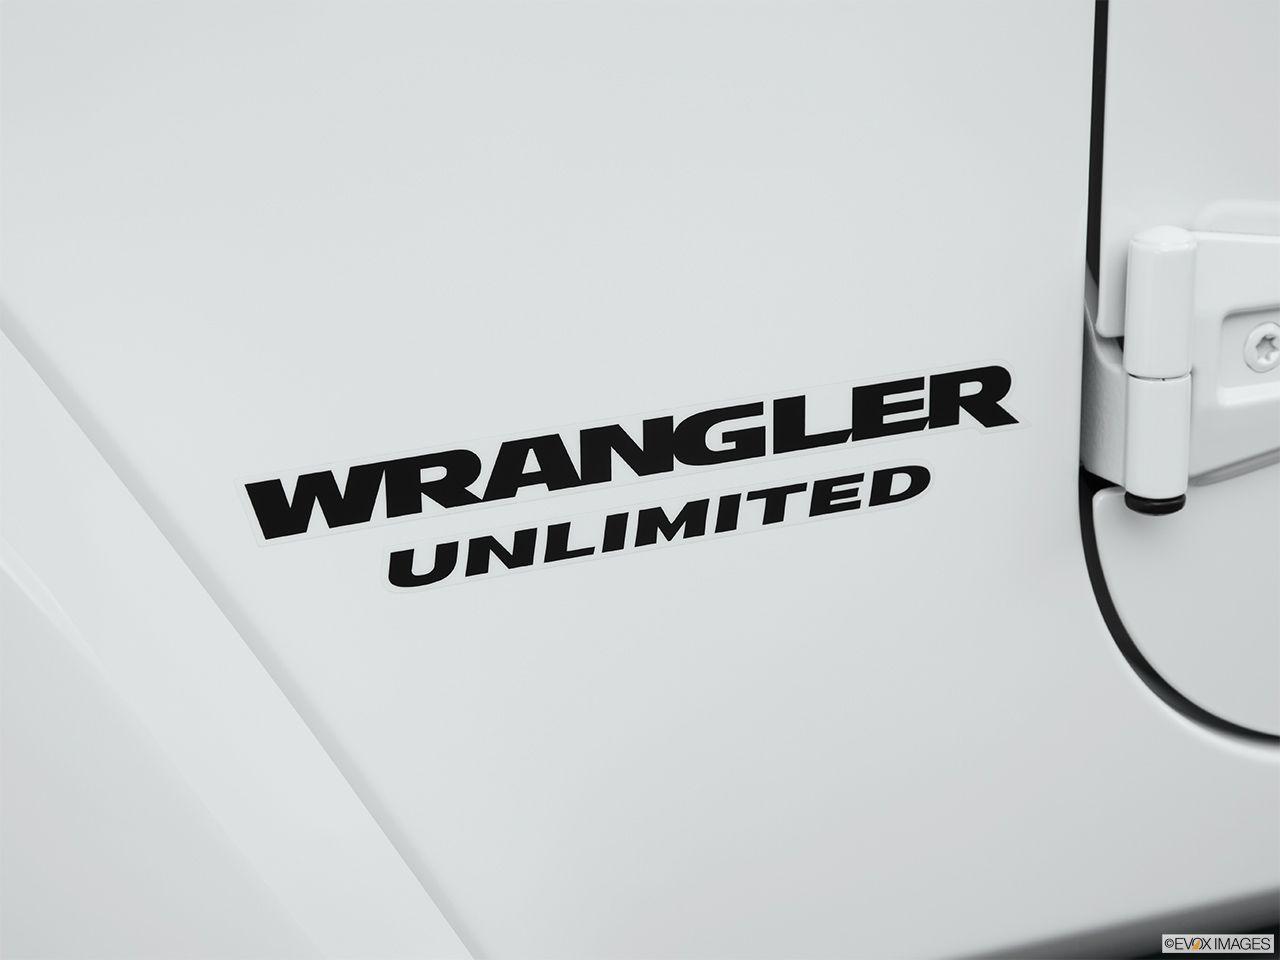 Jeep Wrangler Unlimited Logo - Jeep Wrangler Unlimited 4WD 4 Door Rubicon angle